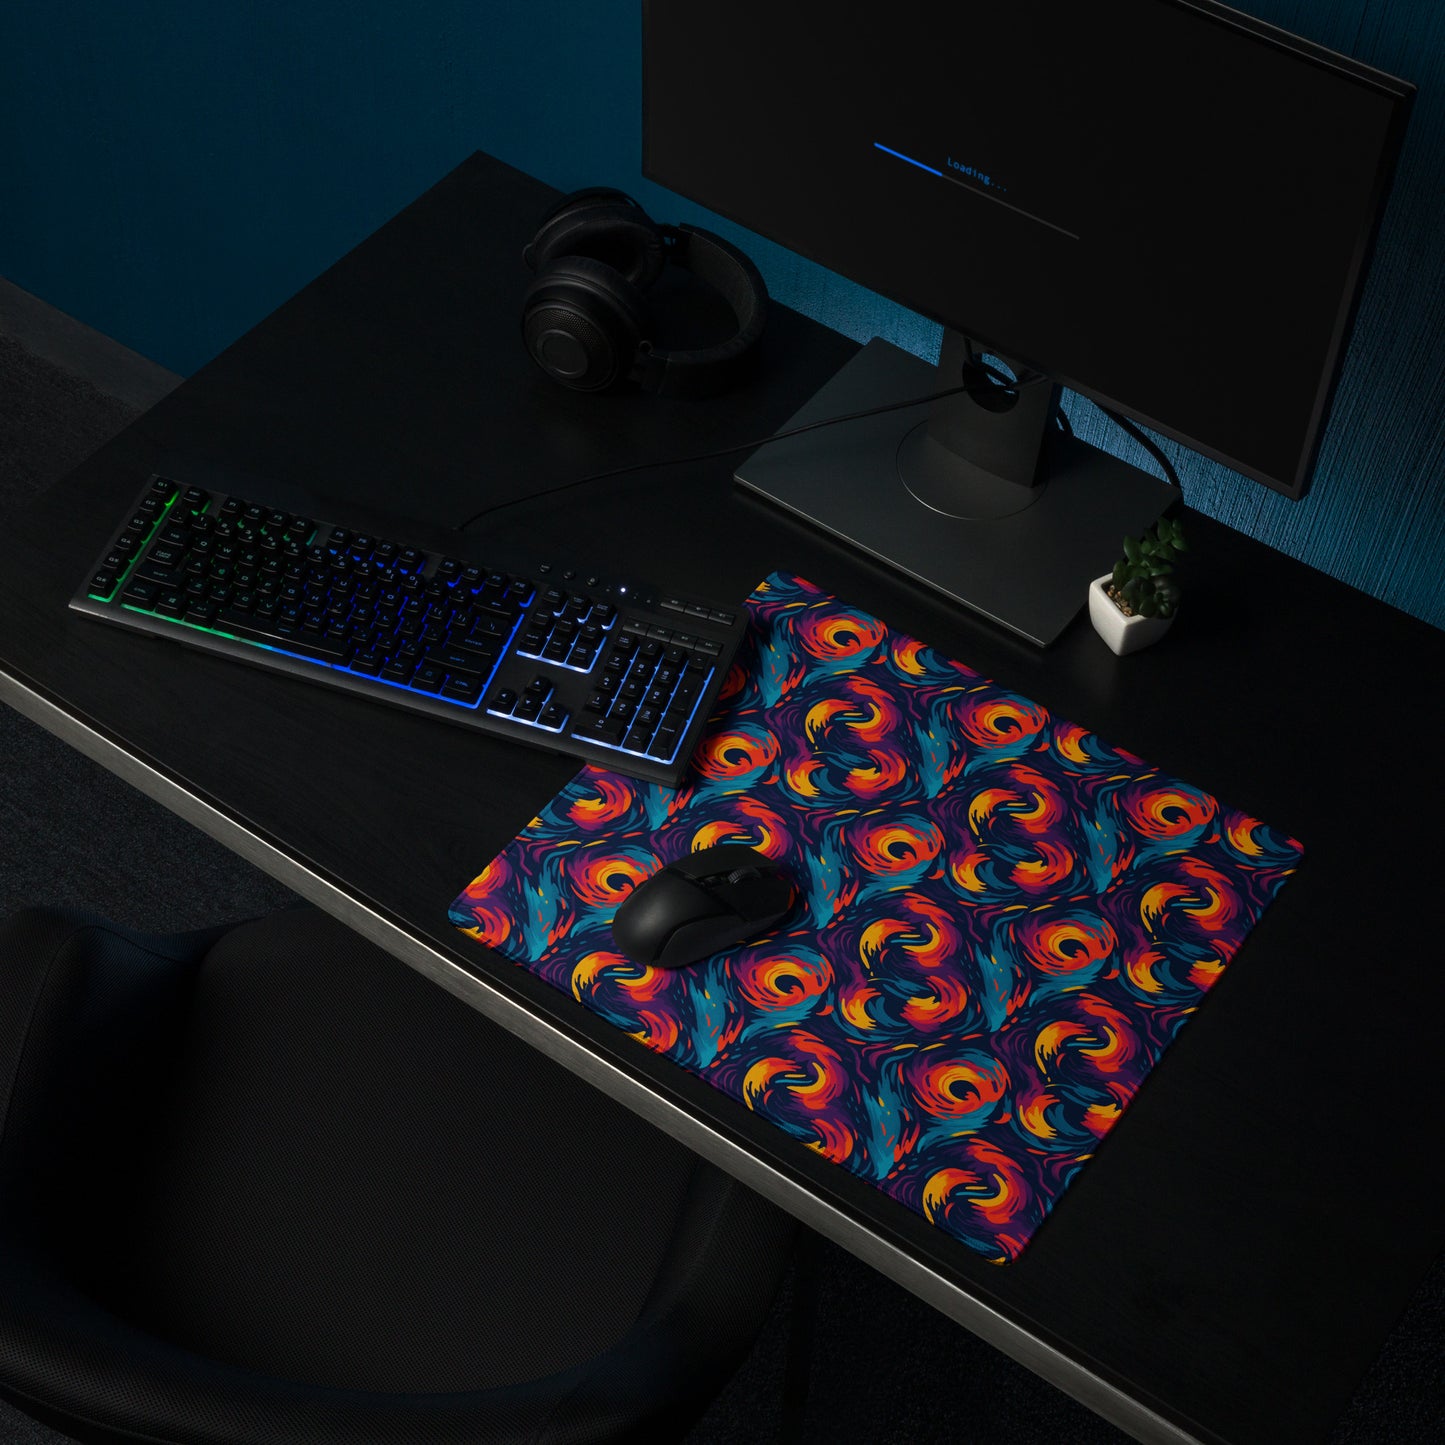 A 18" x 16" desk pad with fiery swirls on it shown on a desk setup. Red and Blue in color.